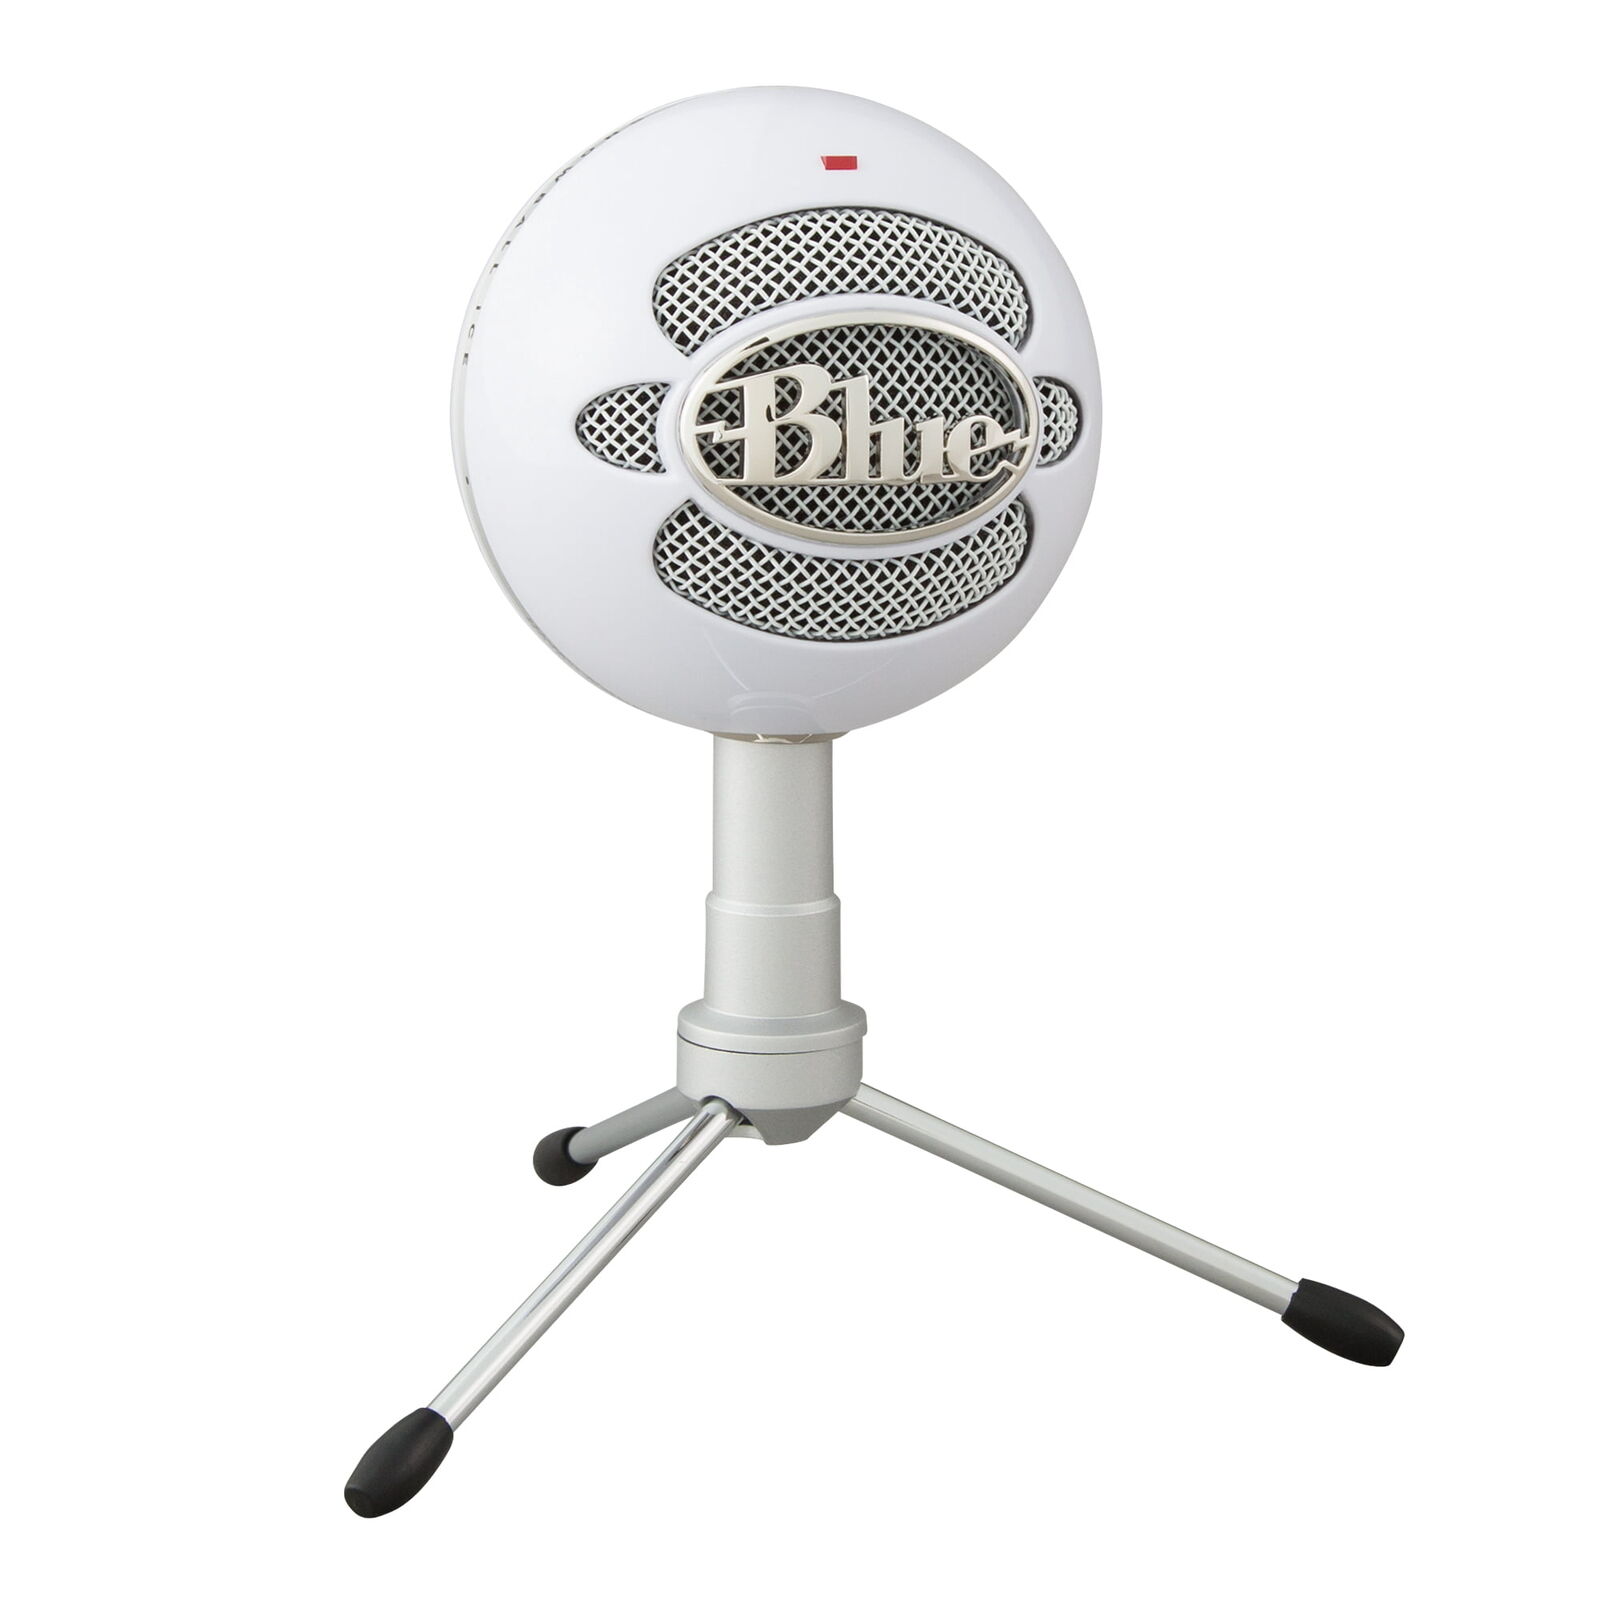 New, Blue Snowball iCE Plug 'n Play USB Microphone, Adjustable Stand, White